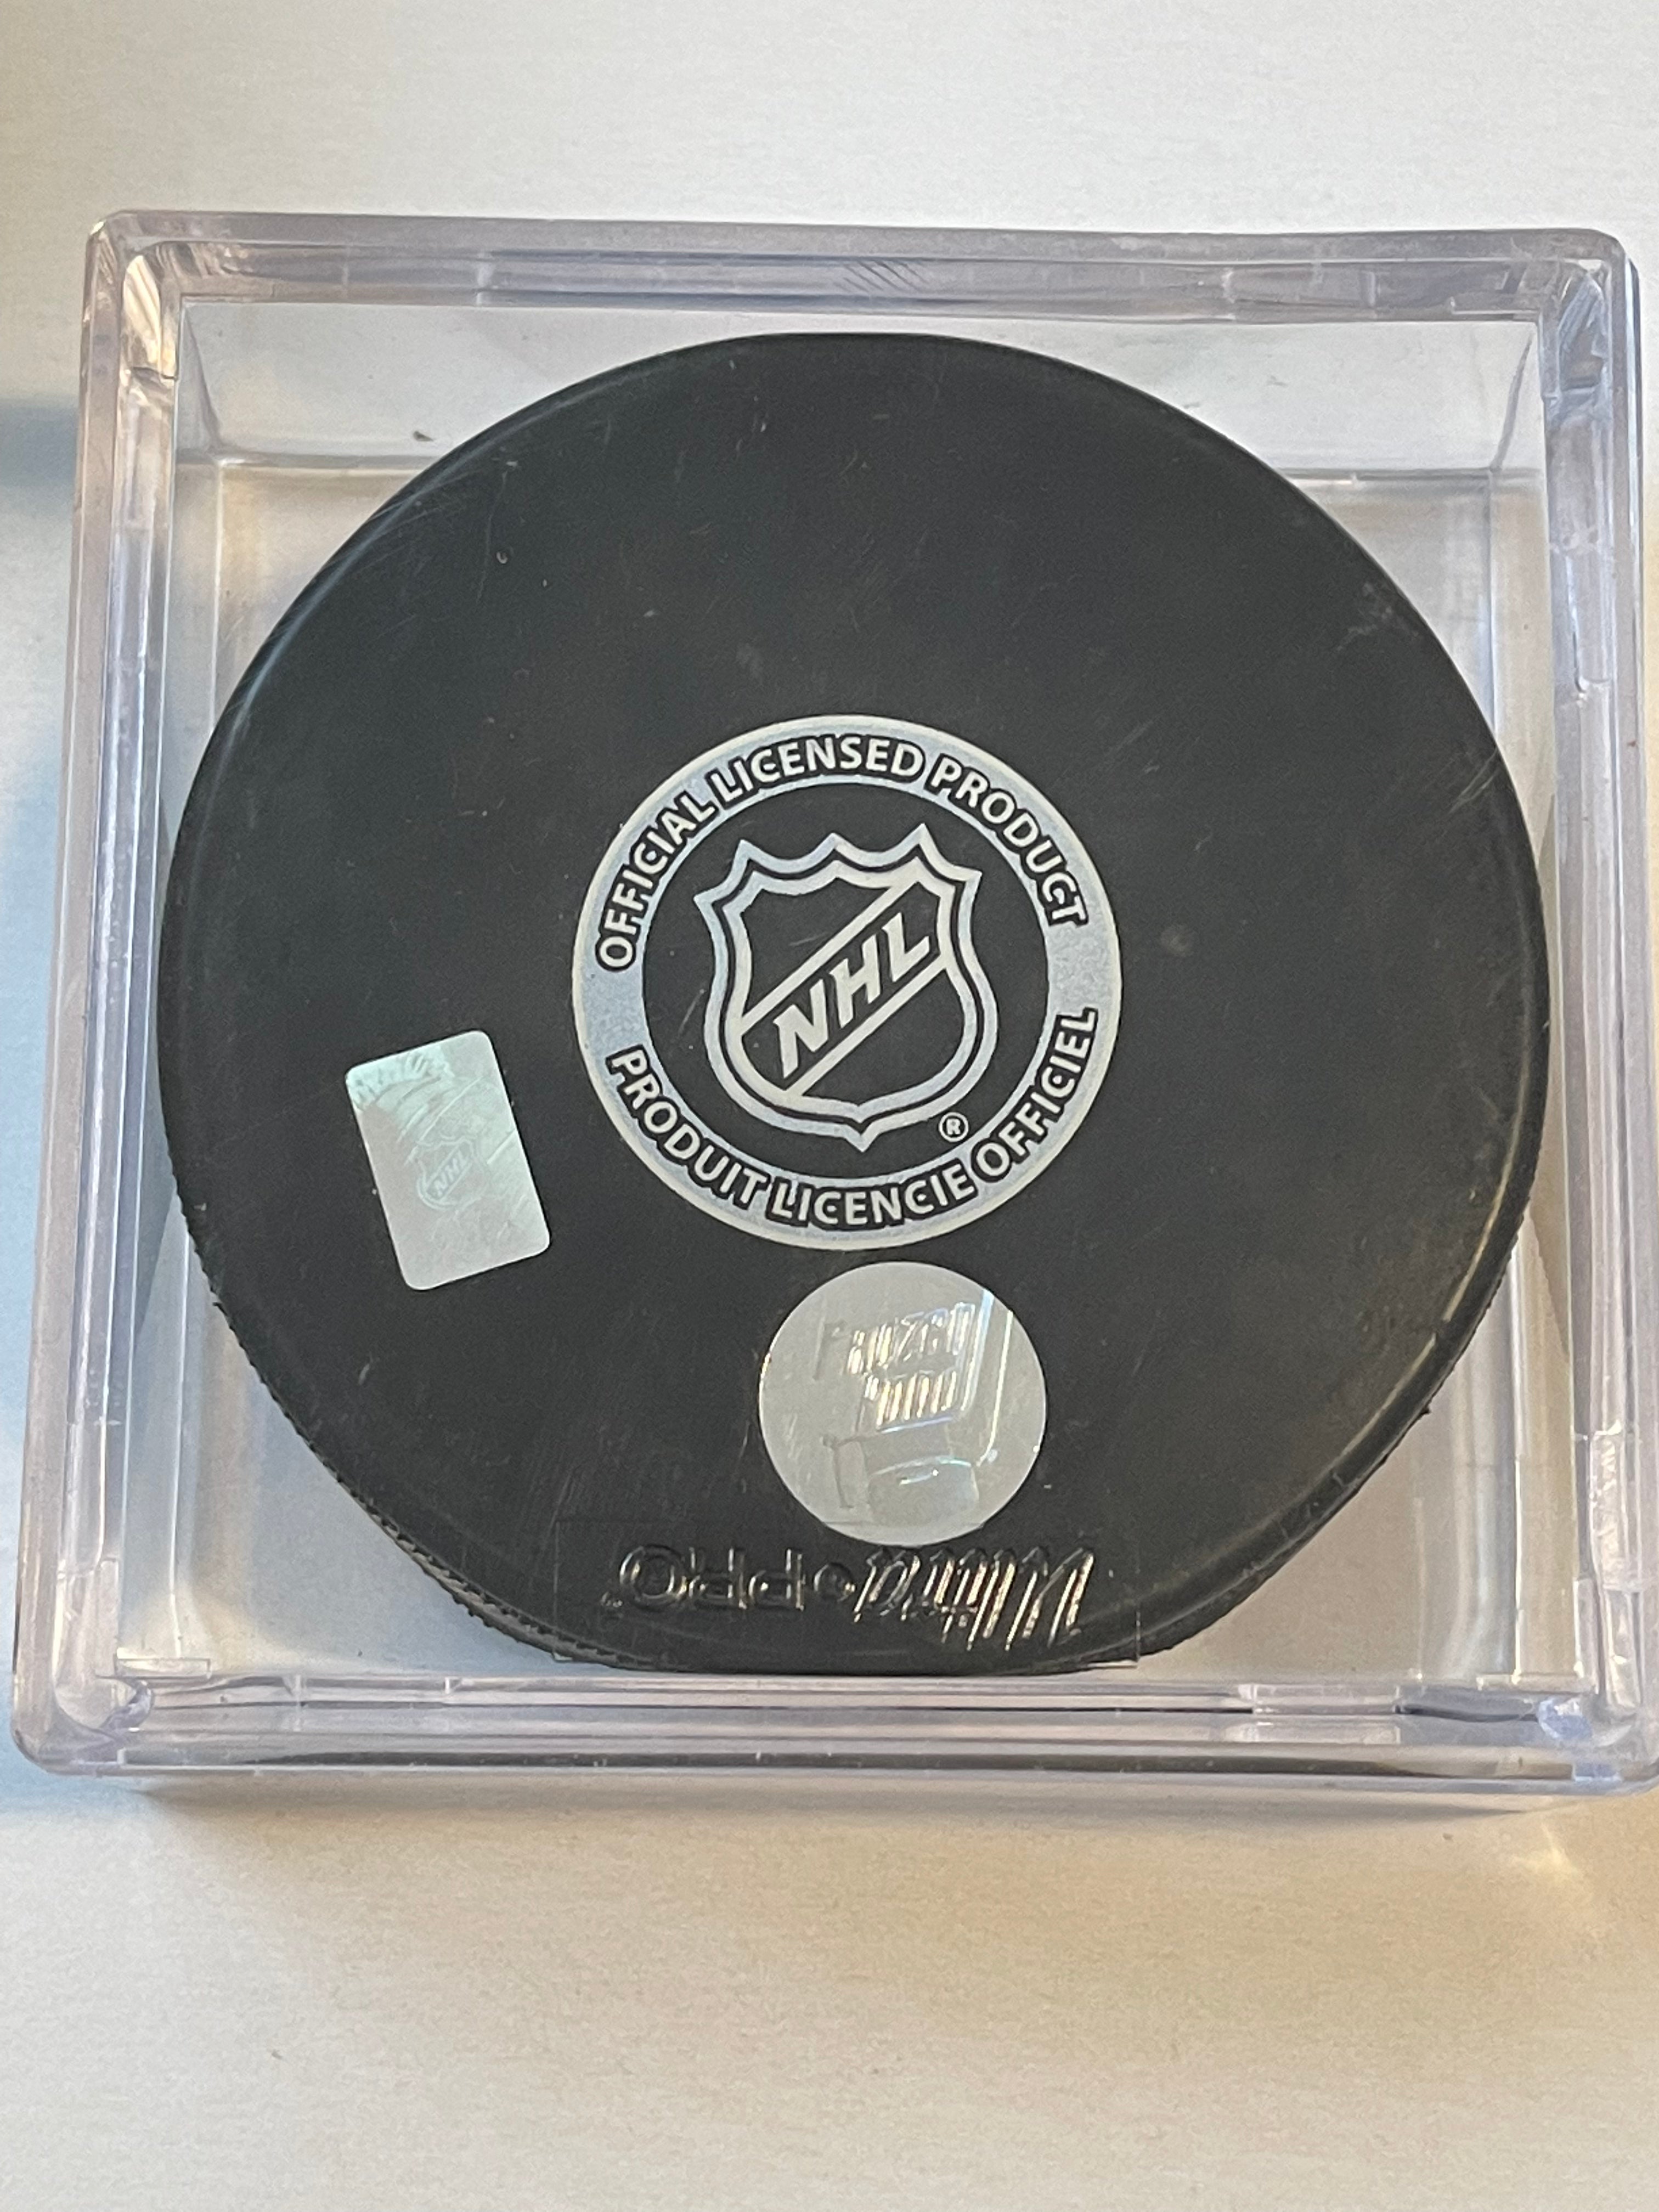 Eddie Shack Toronto Maple Leafs autograph hockey puck in holder with COA